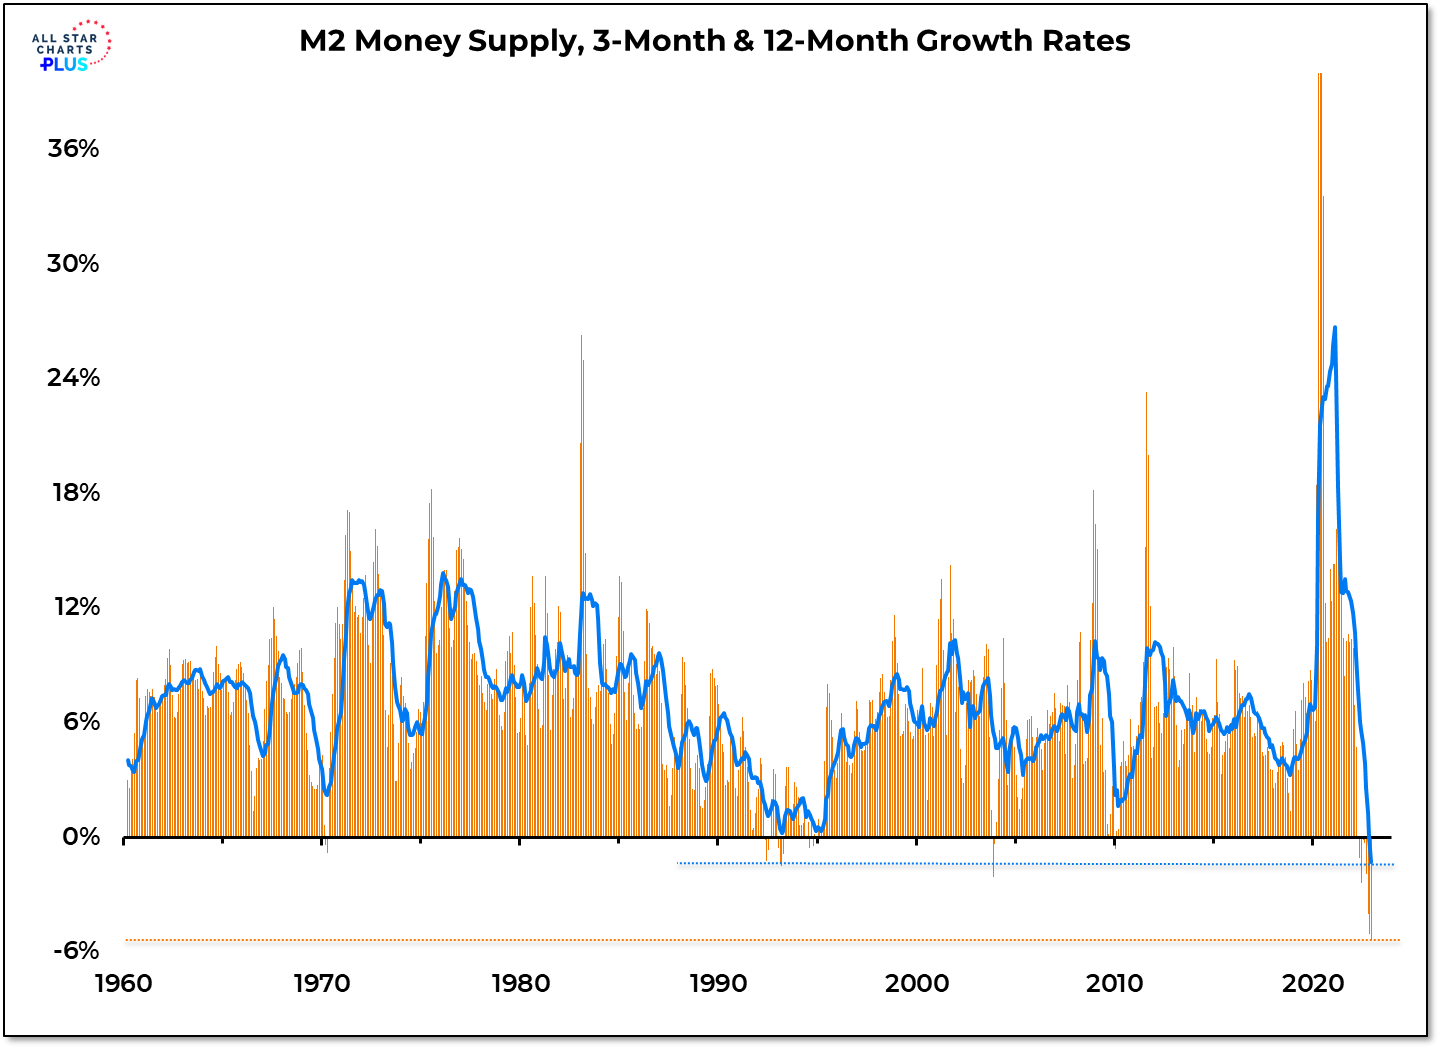 M2 continues its record collapse